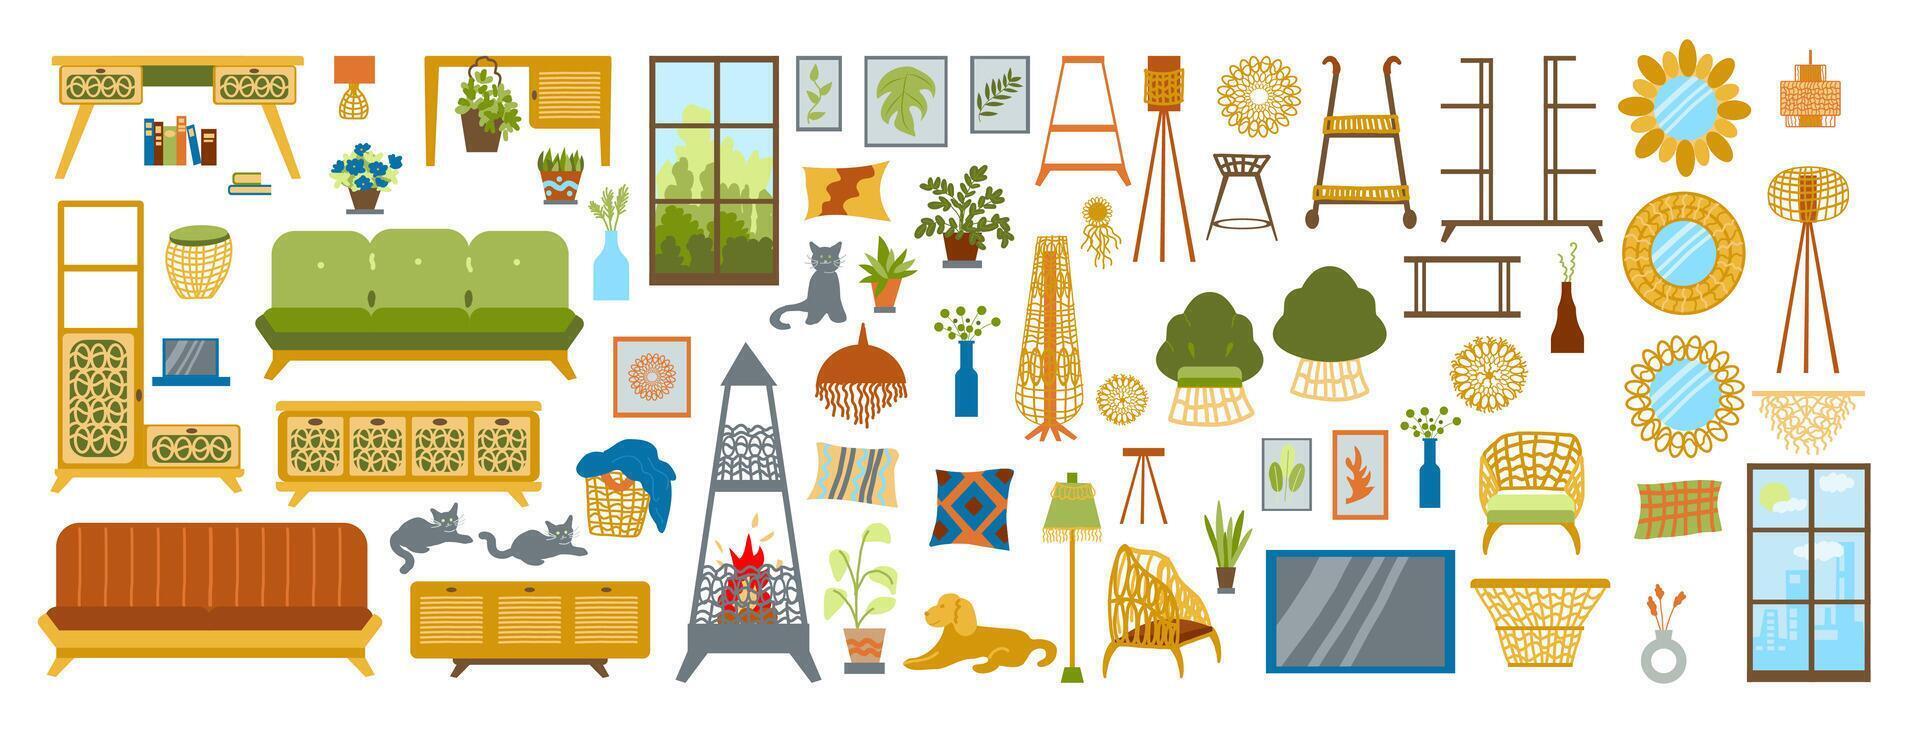 set with furniture and decor for a cozy eco-friendly interior in boho style. A collection of illustrations of furniture in a flat doodle style. vector